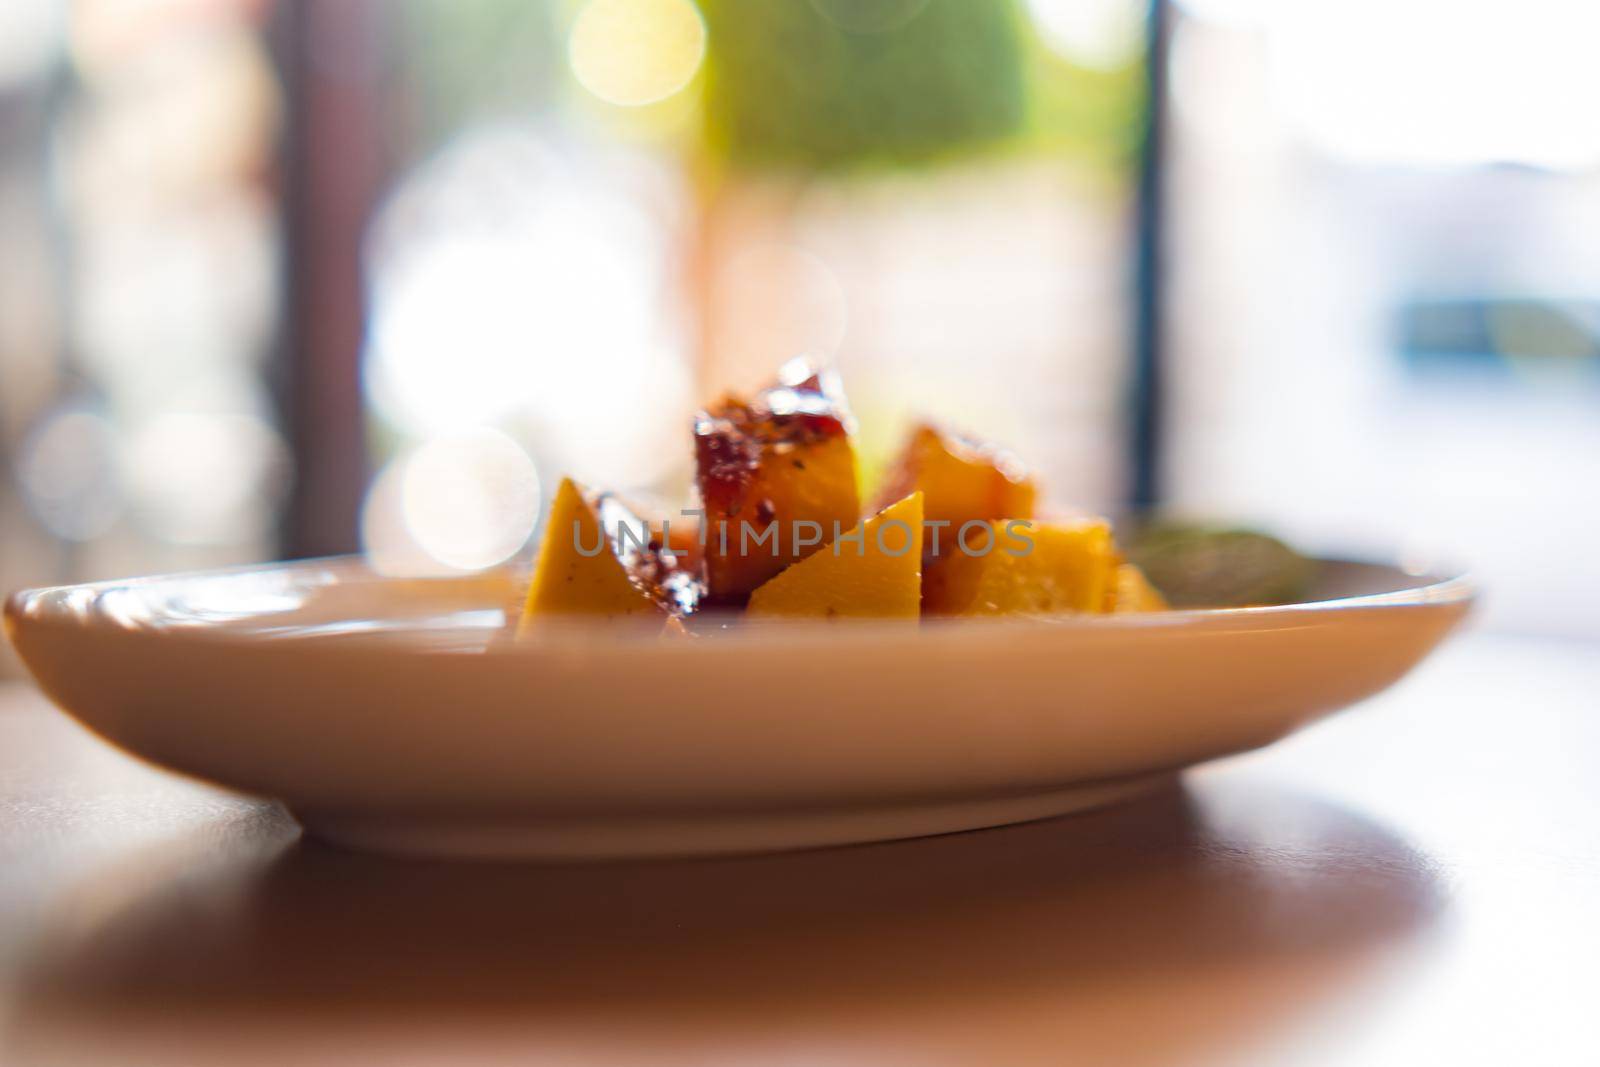 Plate of chopped mango with chili powder and Mexican chamoy sauce with blurry background. Fresh tropical fruit slices with spicy and sour condiment above wooden table. Healthy food and snacks